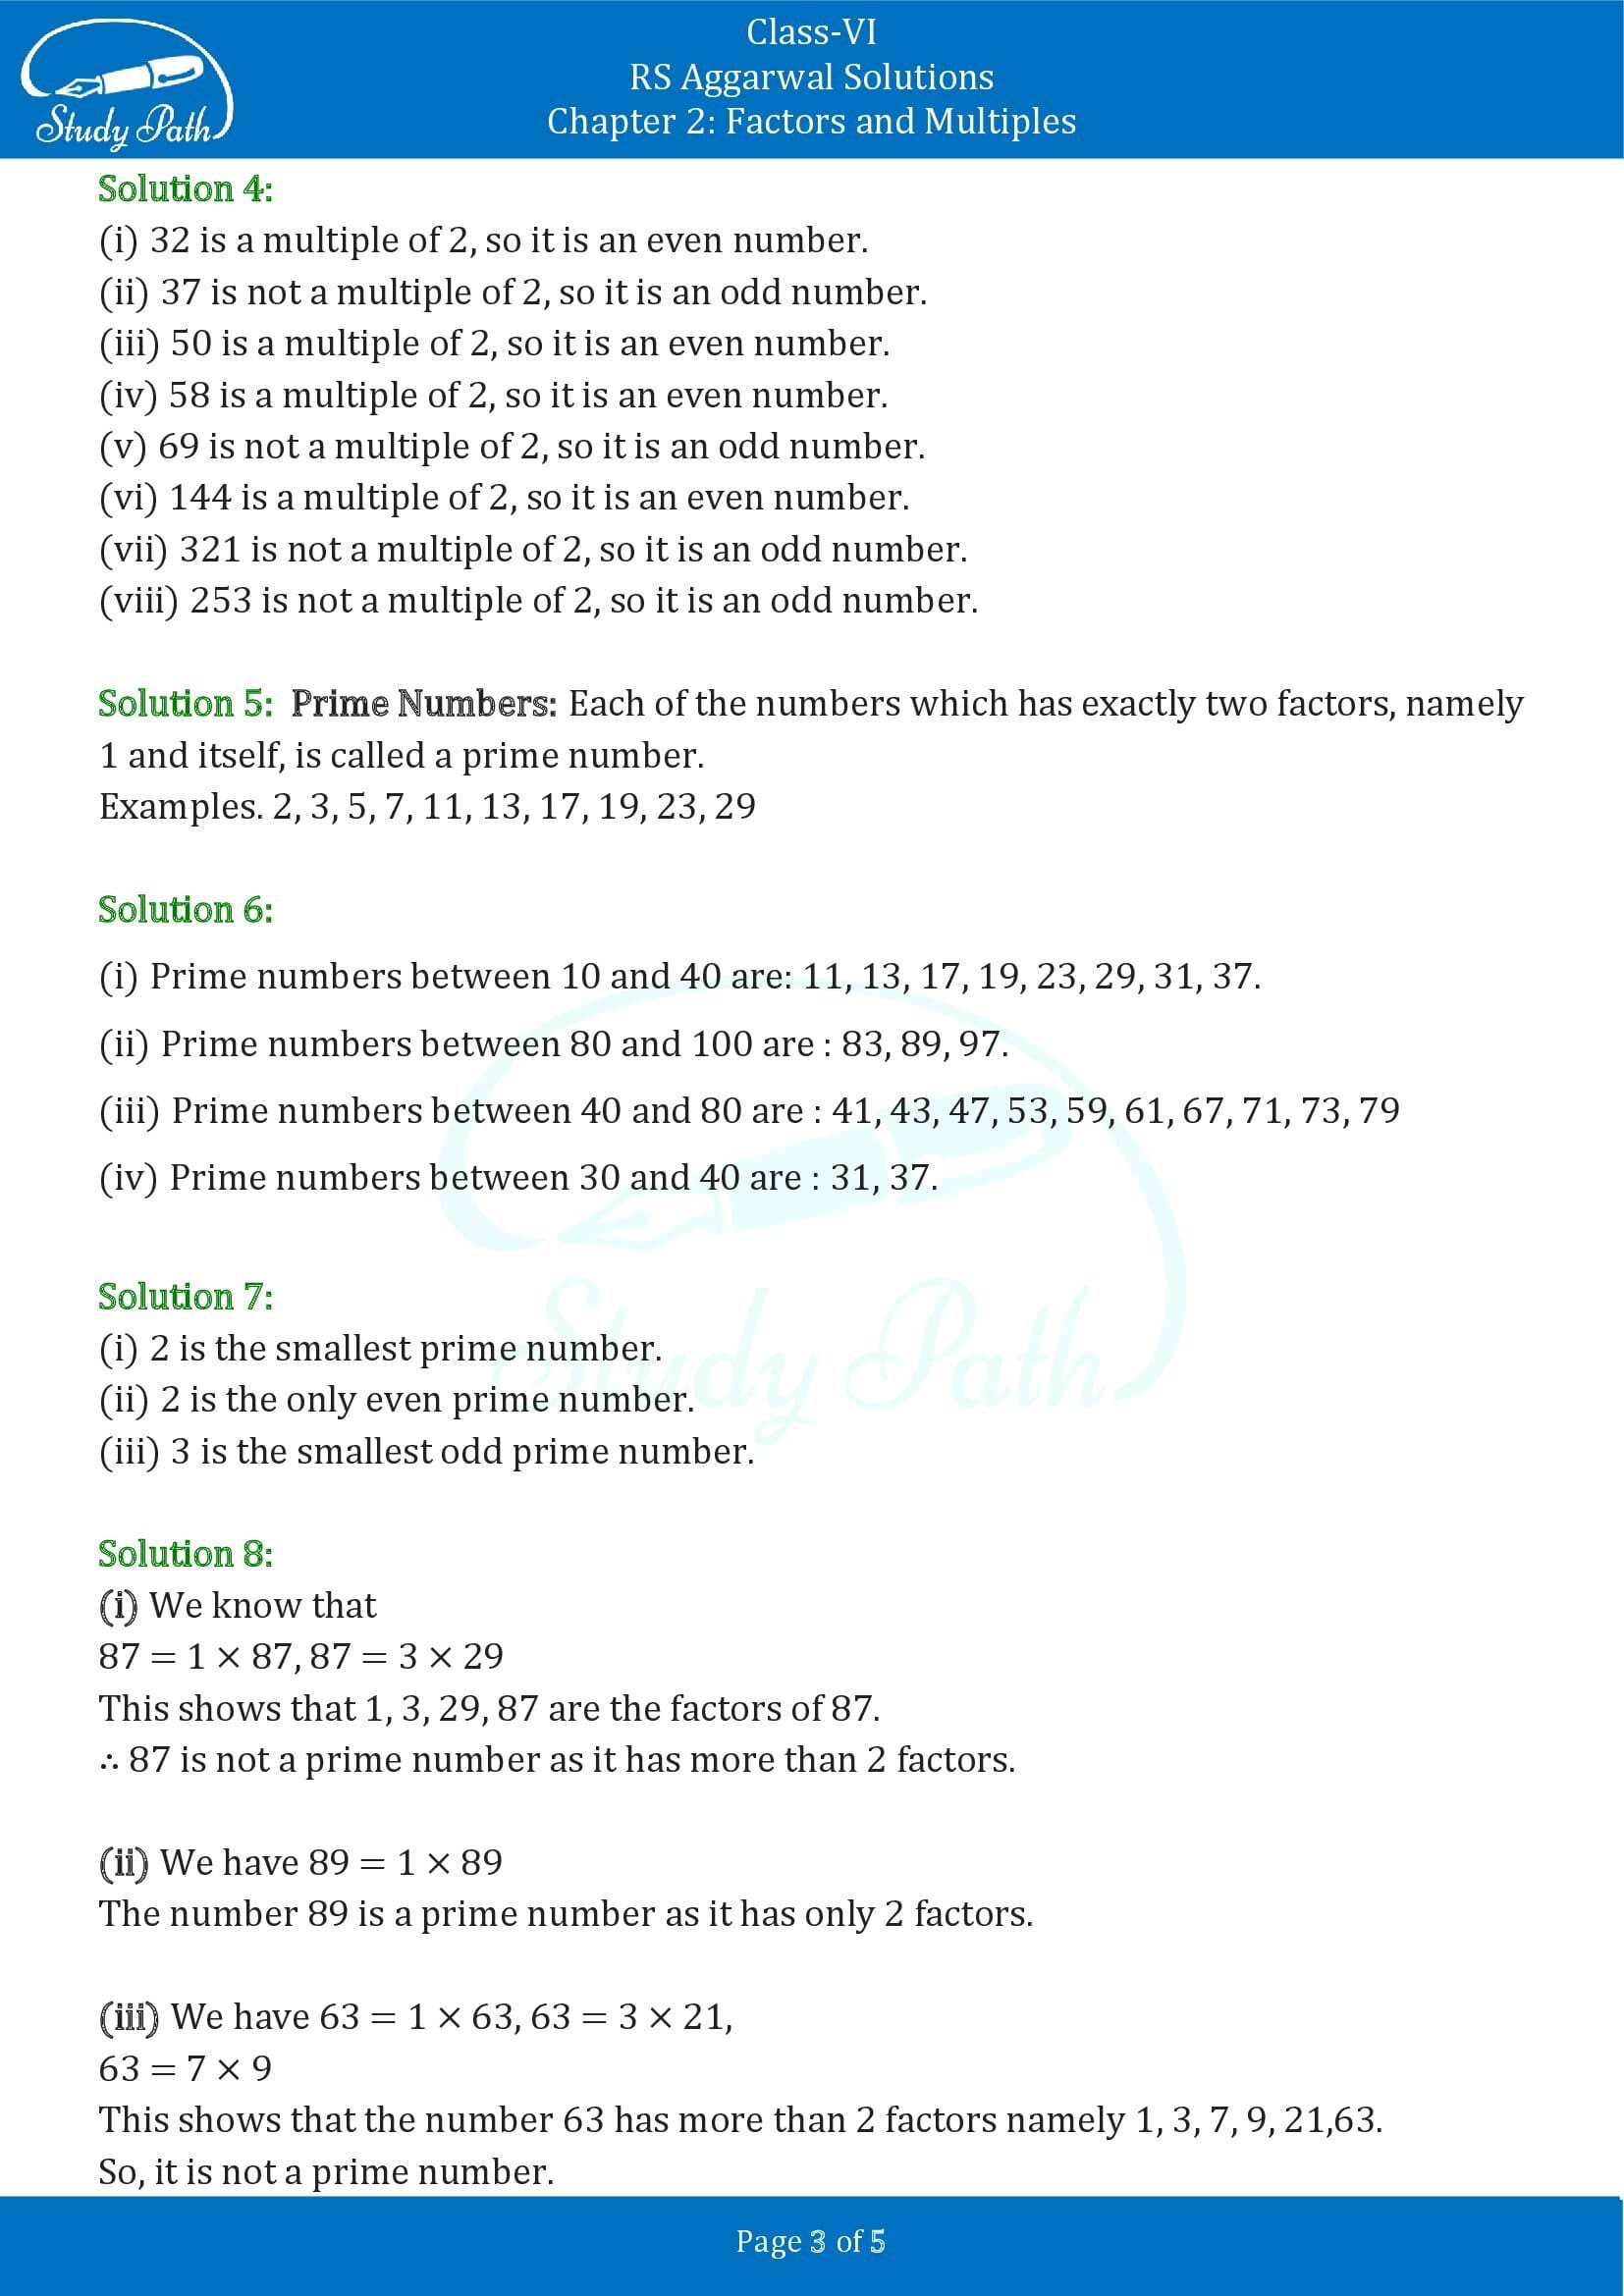 RS Aggarwal Solutions Class 6 Chapter 2 Factors and Multiples Exercise 2A 00003